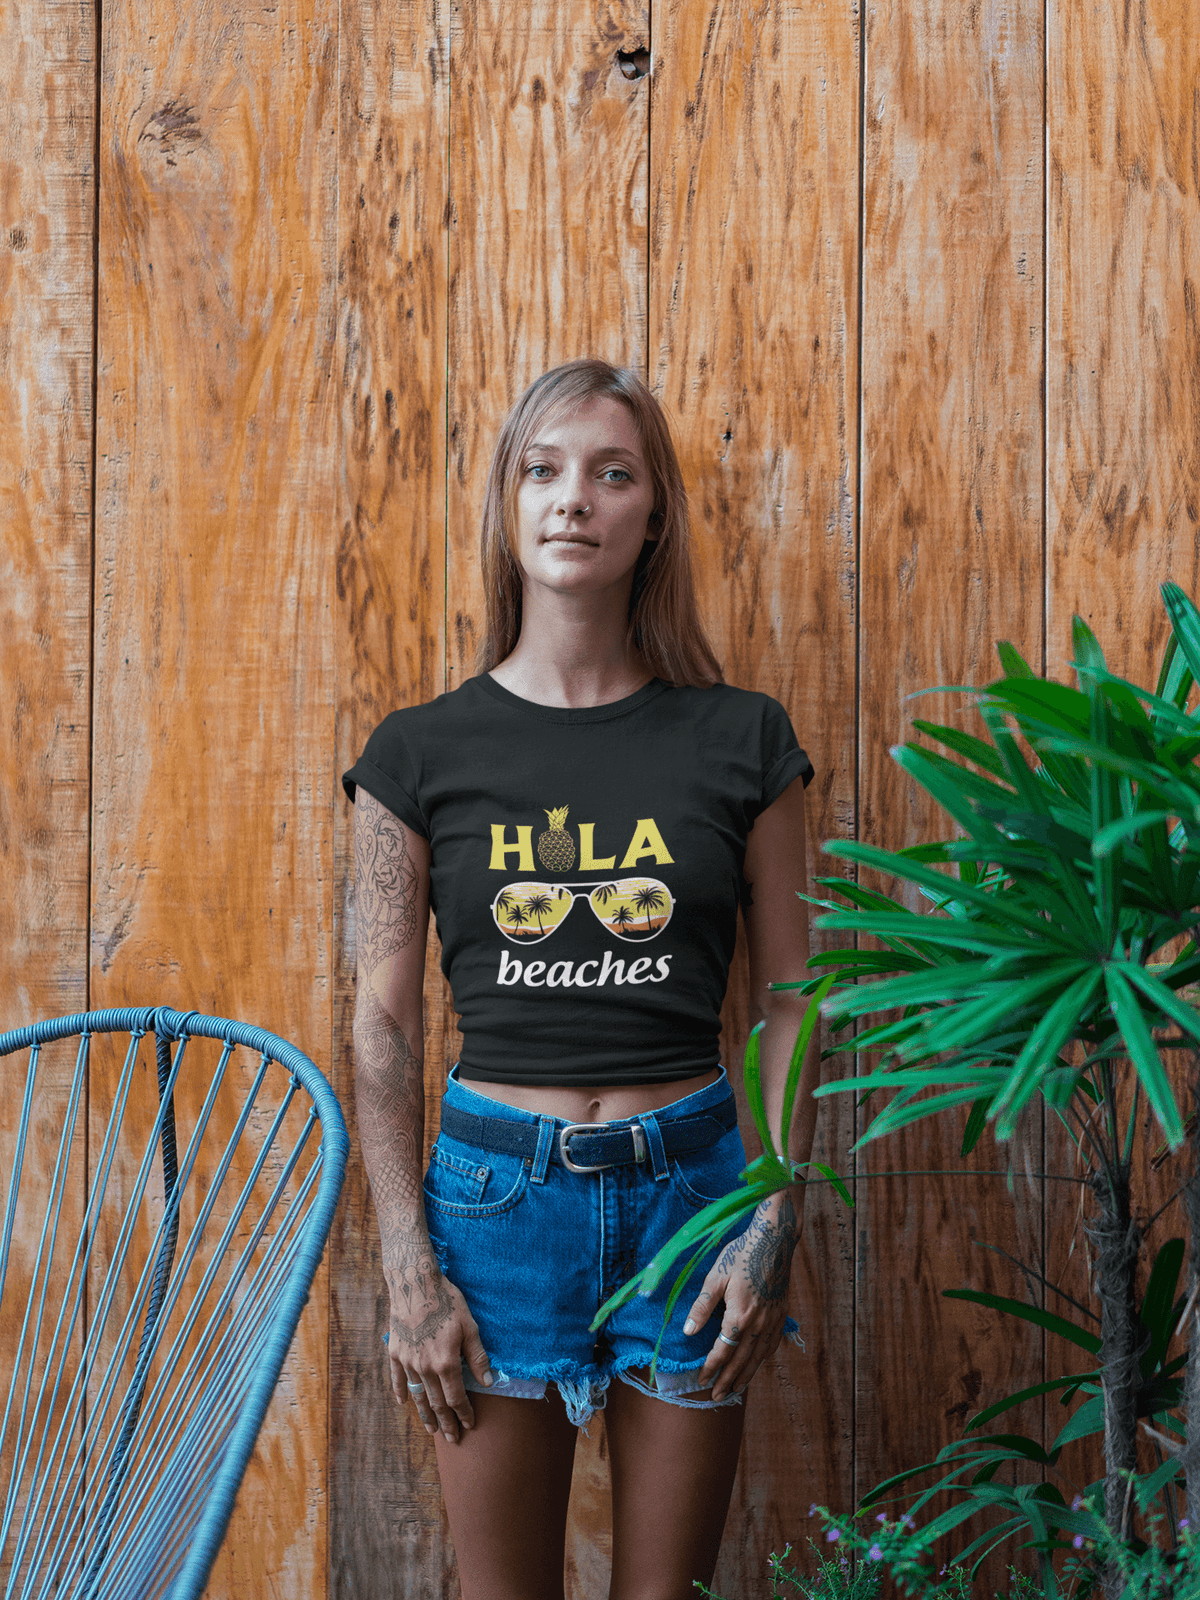 HOLA Beaches Cropped T-Shirt-Cropped Tees-StylinArts